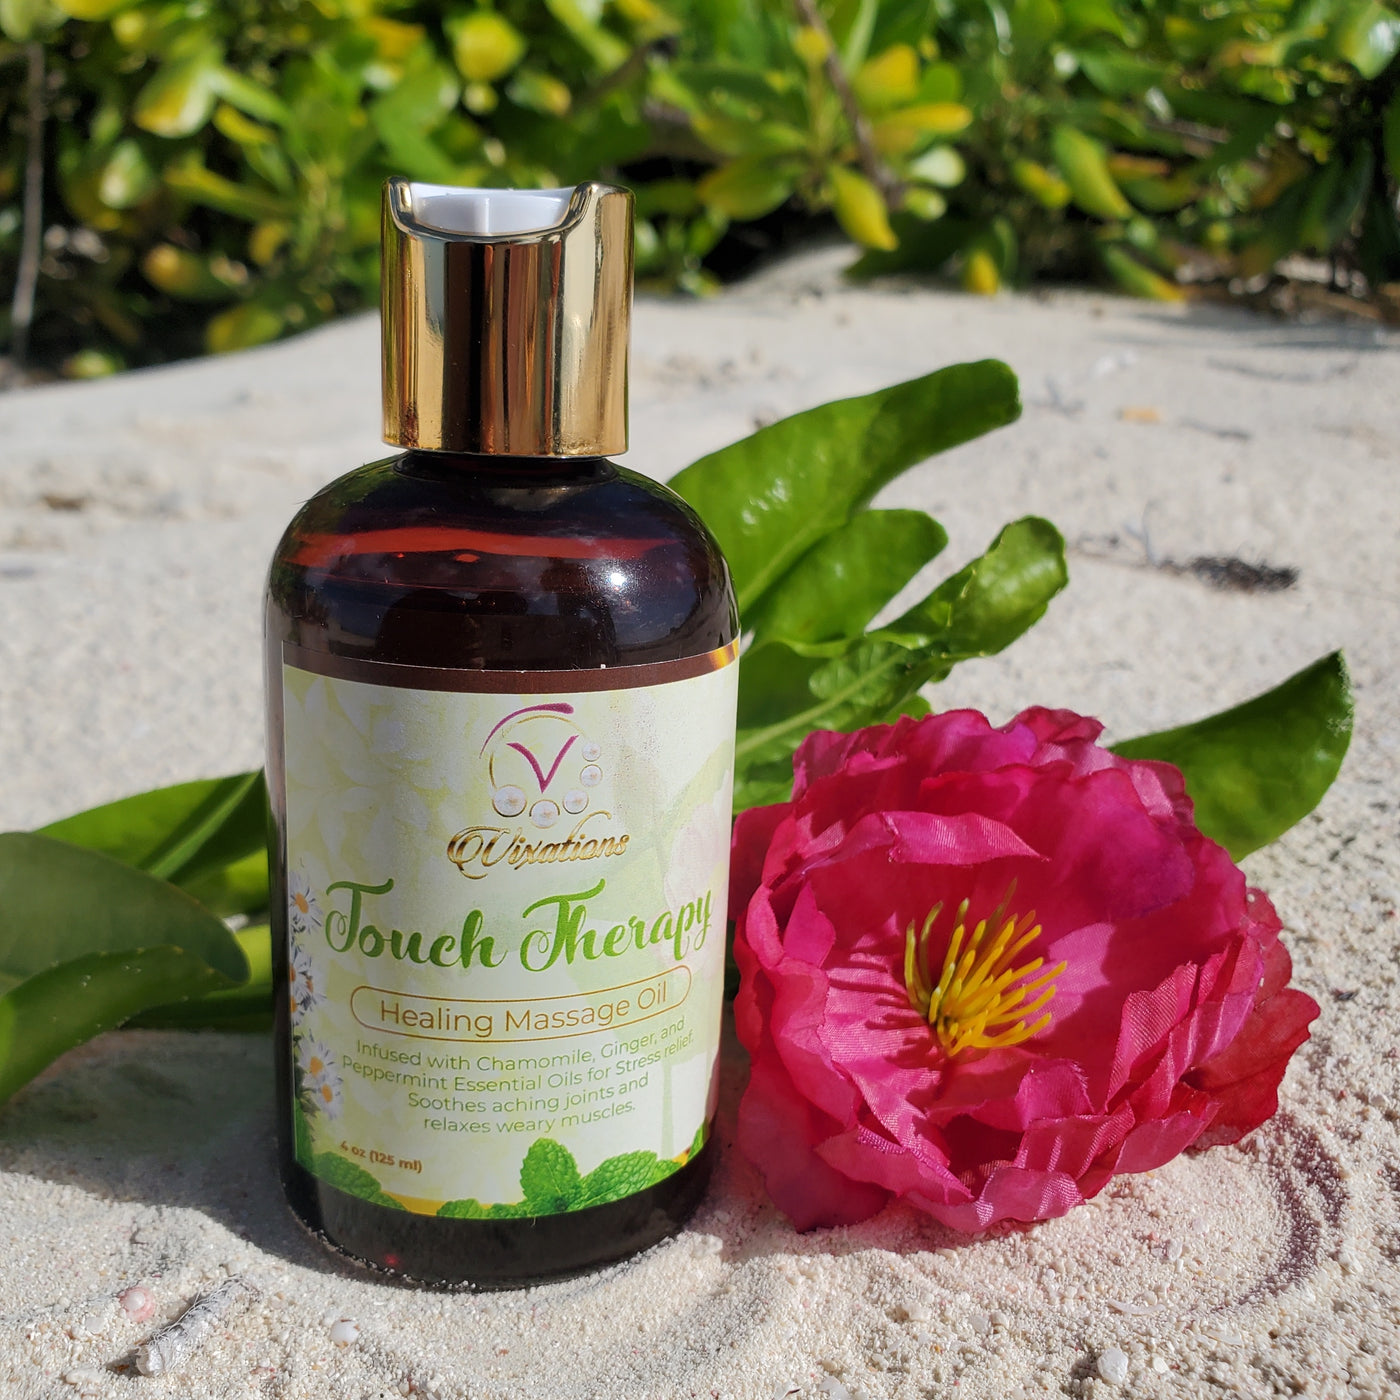 “Touch Therapy” Healing Massage Oil